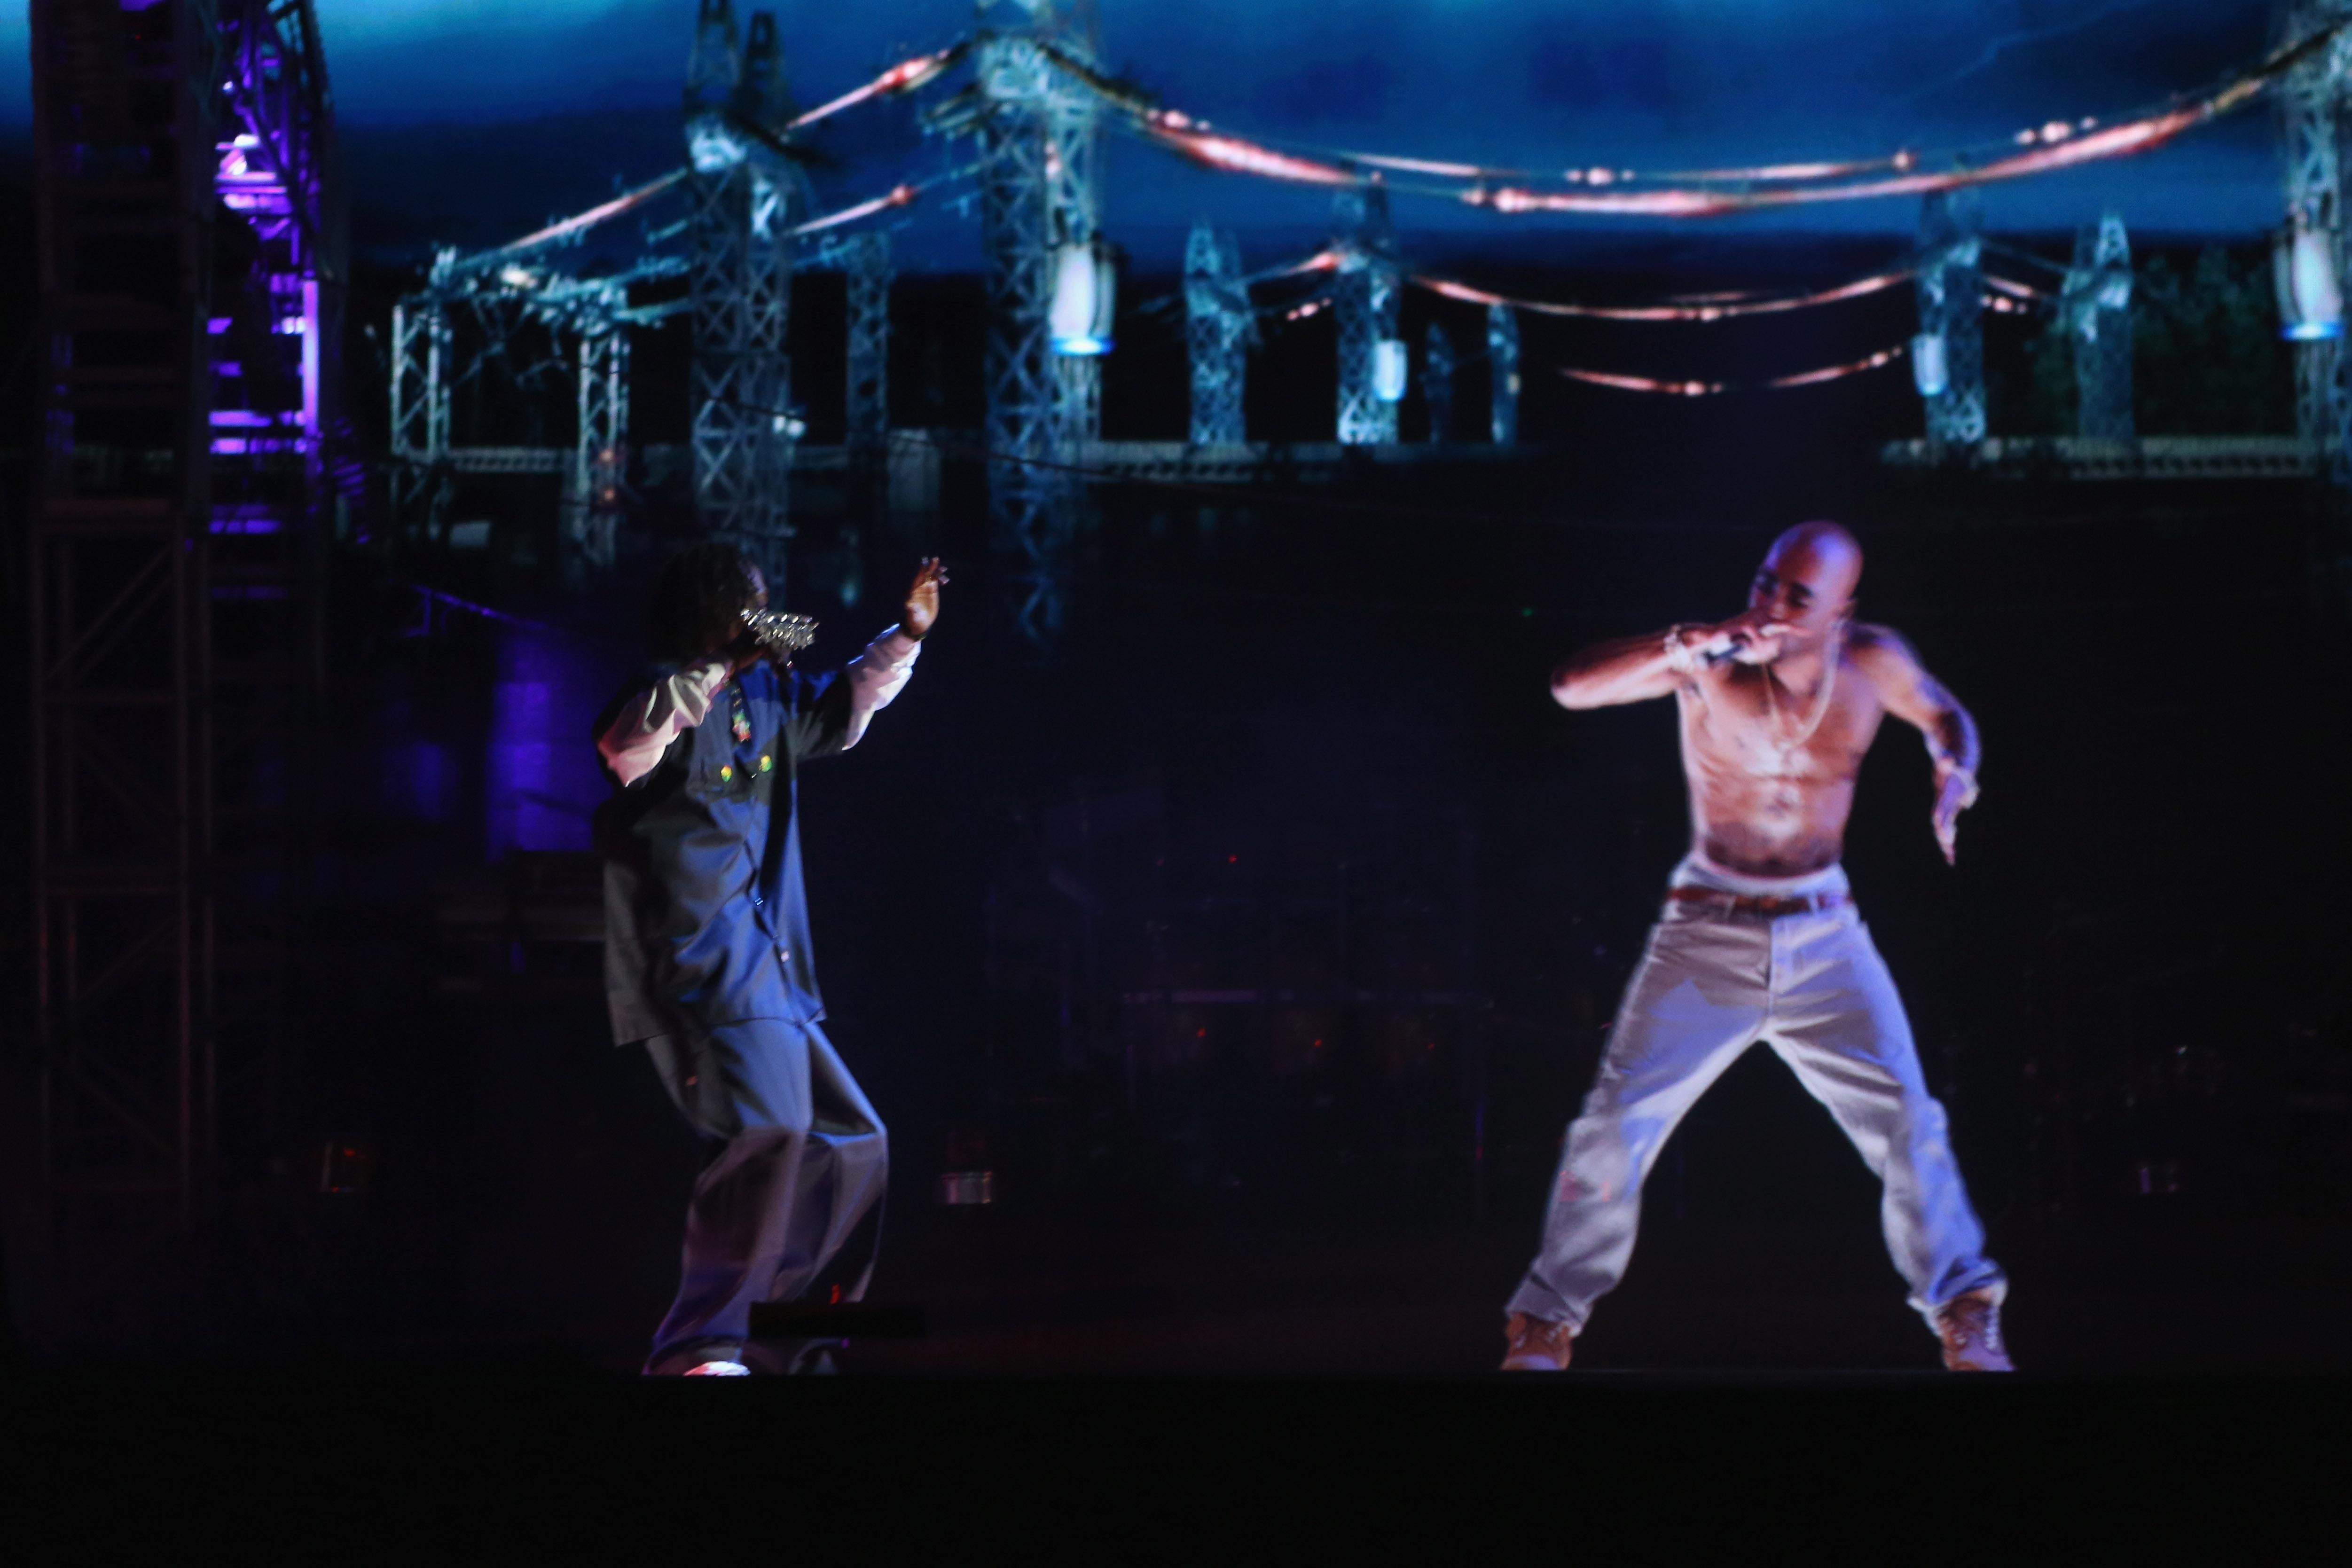 Tupac's hologram rapping into a holographic microphone as Snoop hypes him up on a dark stage